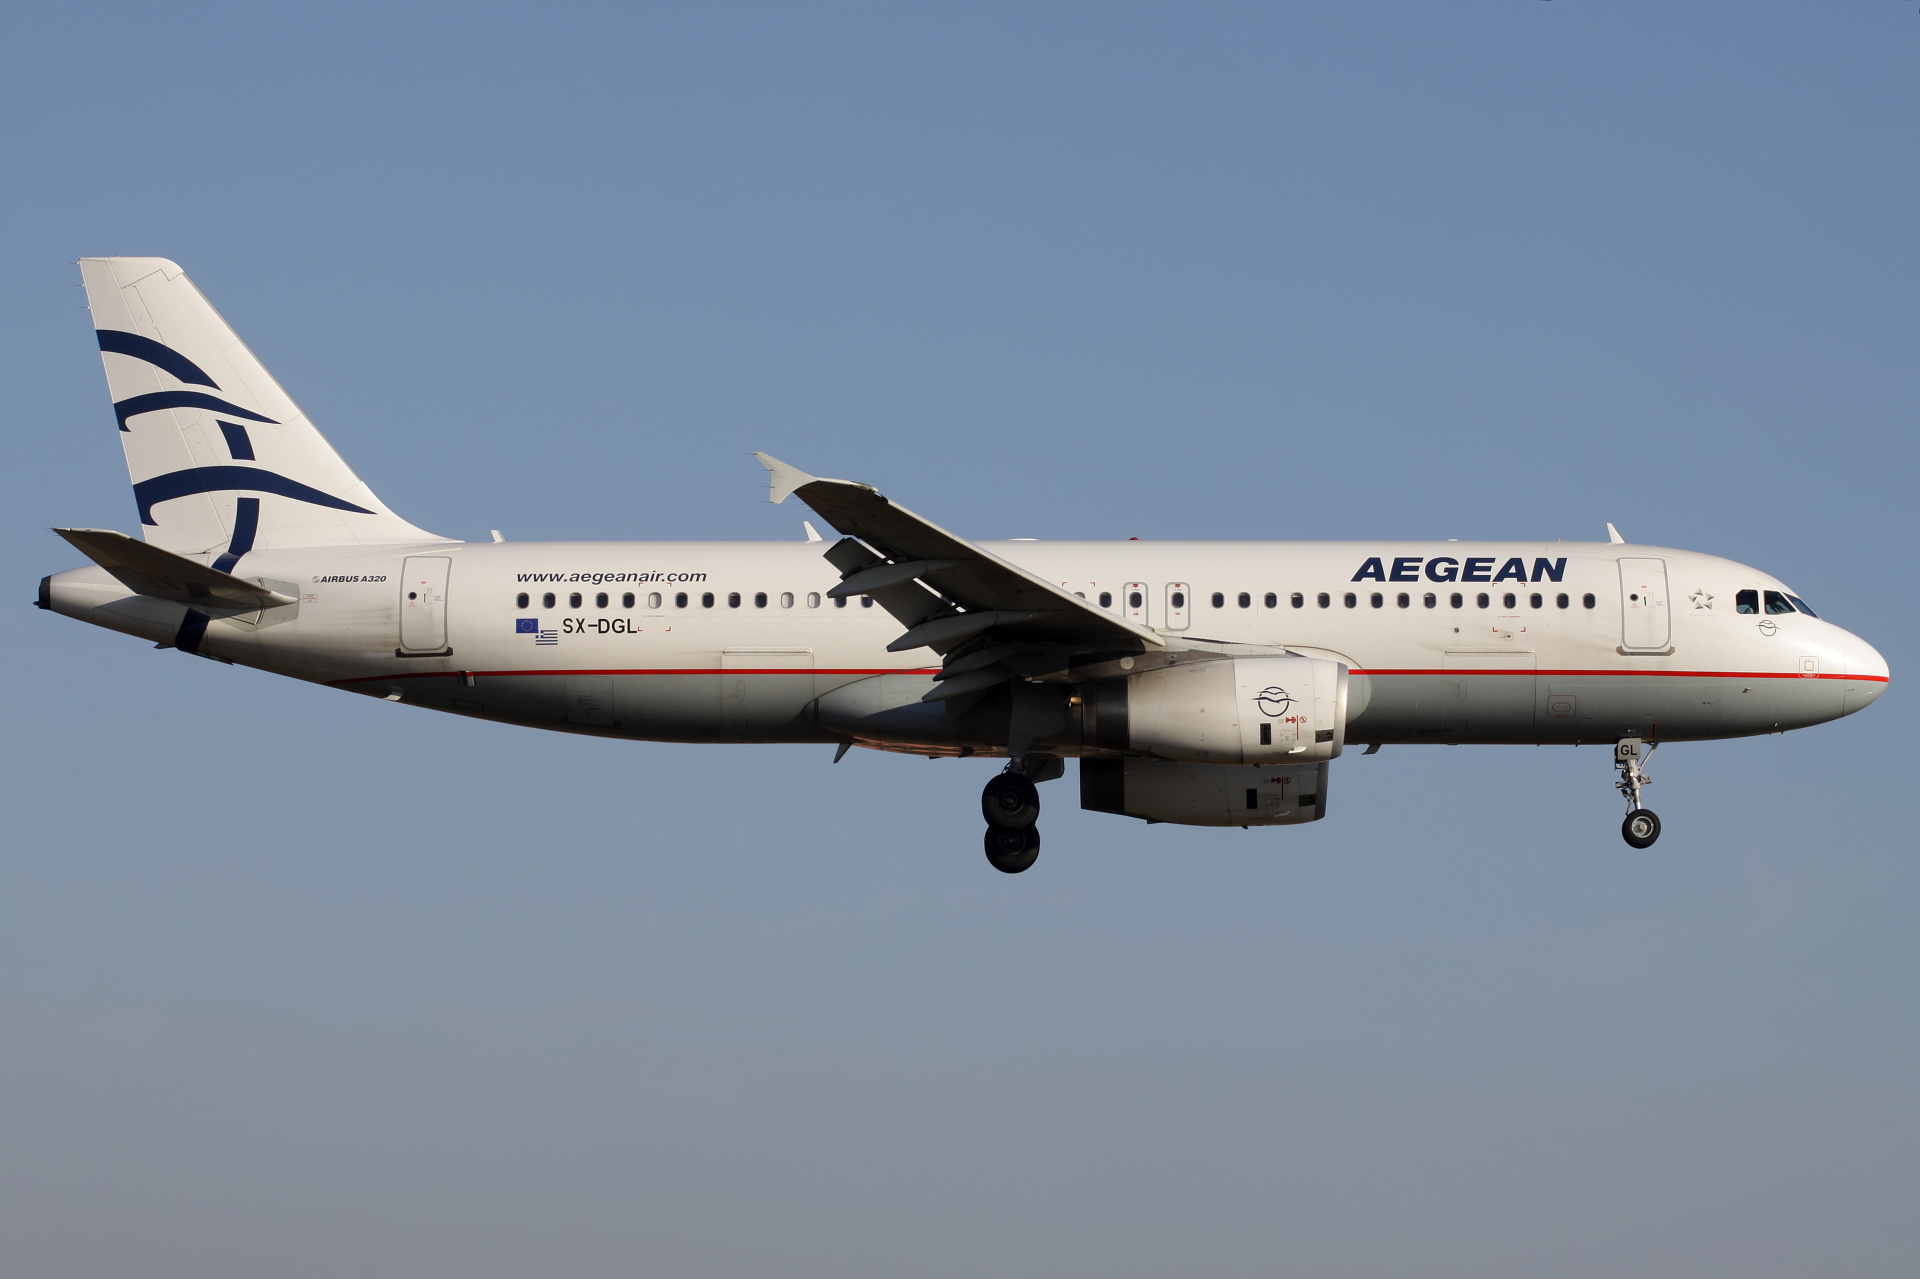 SX-DGL (Aircraft » EPWA Spotting » Airbus A320-200 » Aegean Airlines)